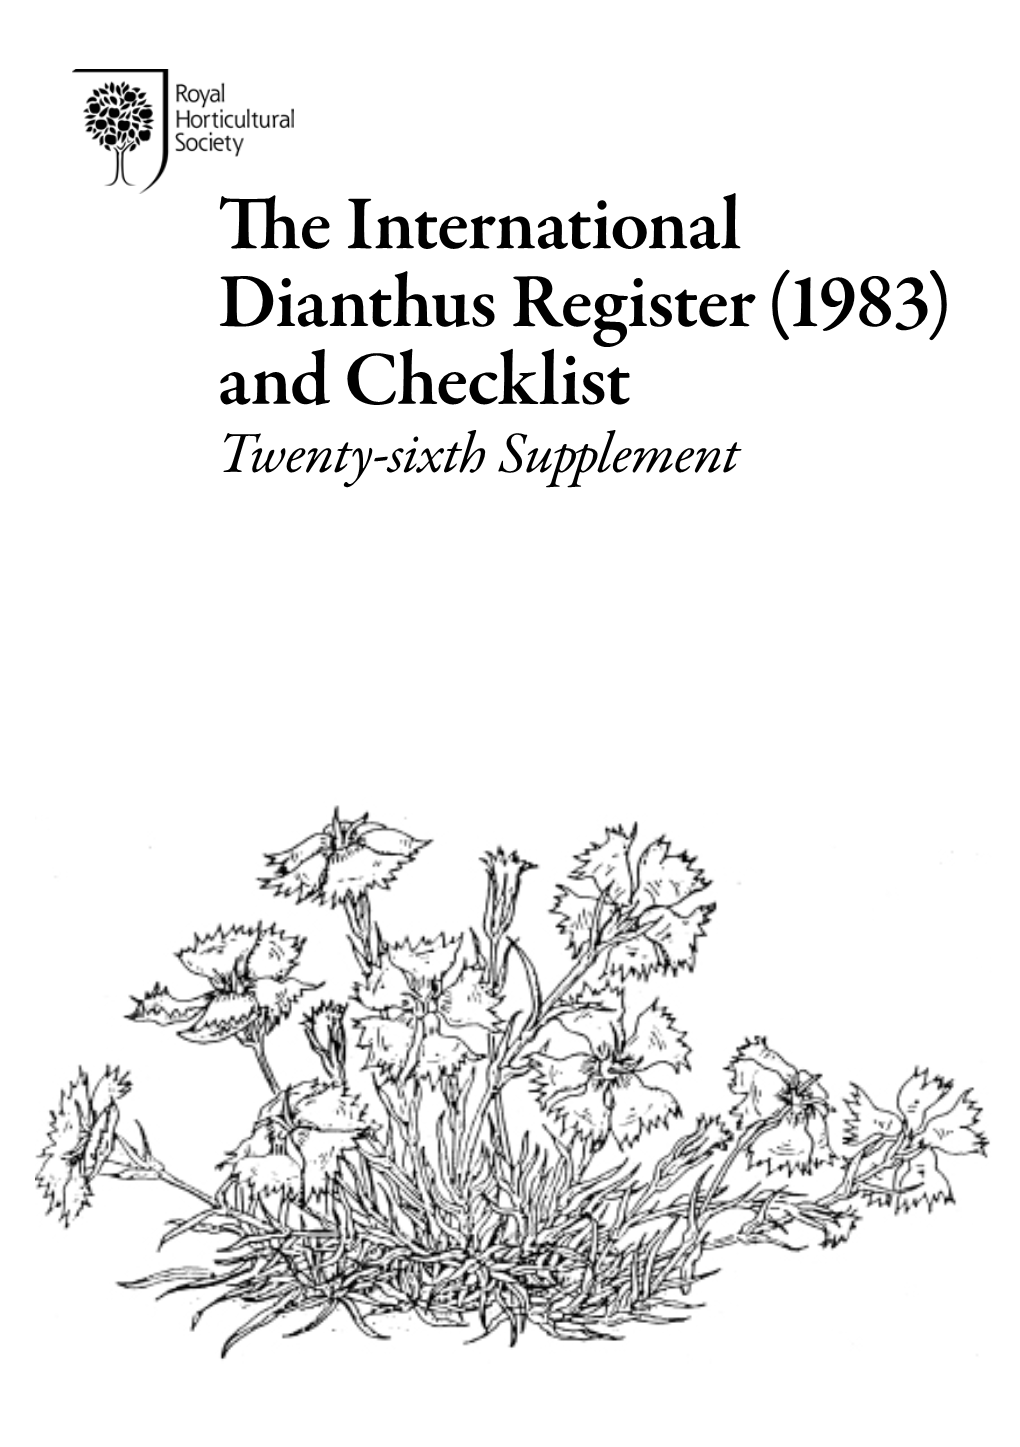 The International Dianthus Register (1983) and Checklist